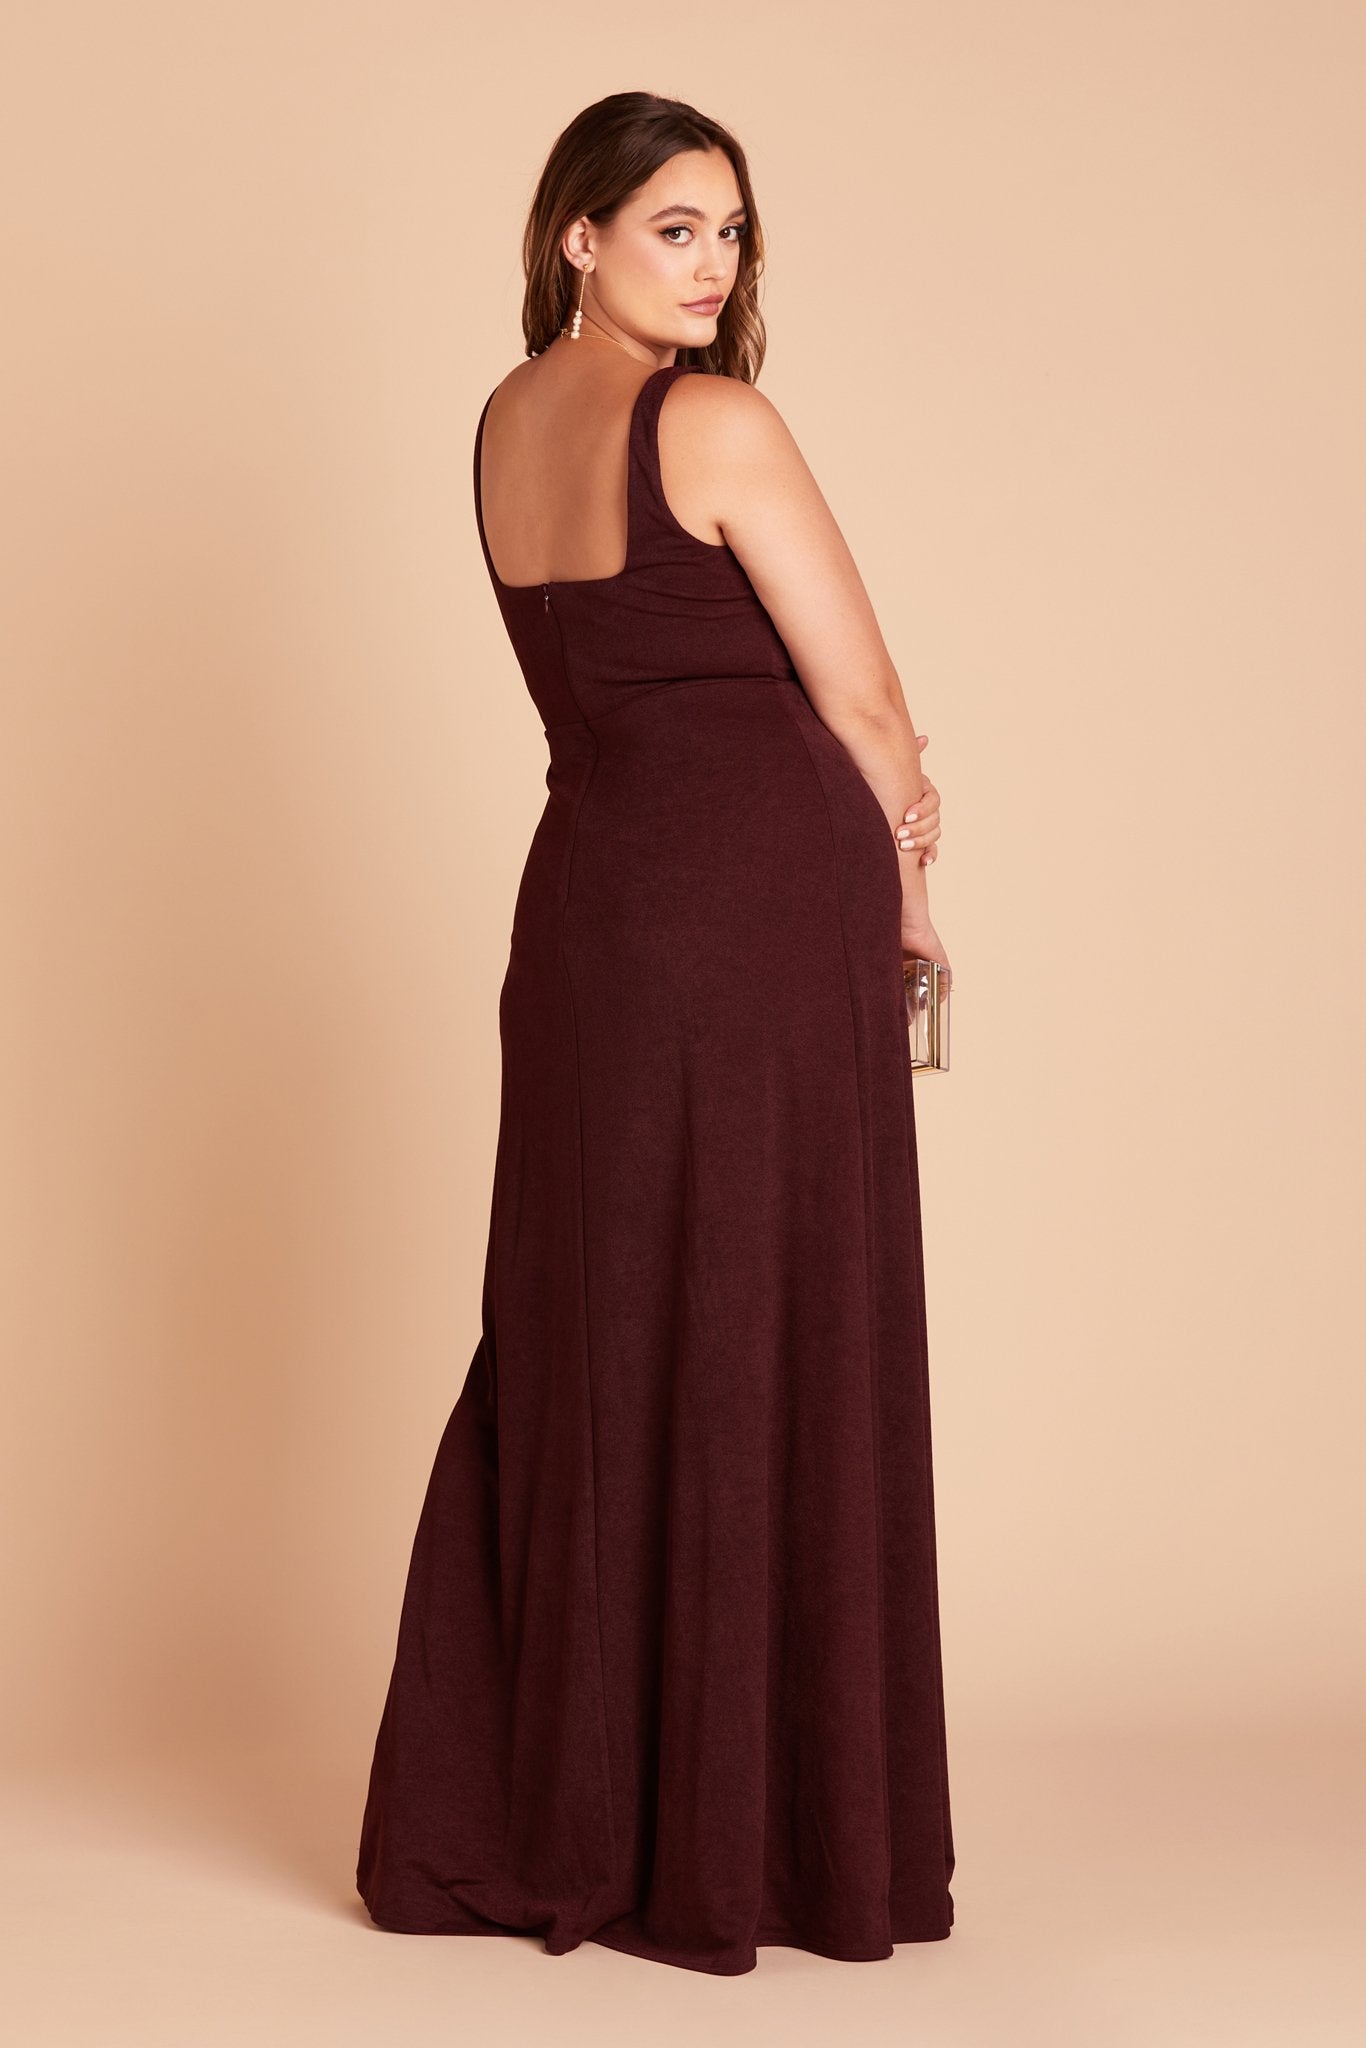 Alex convertible plus size bridesmaid dress with slit in cabernet burgundy crepe by Birdy Grey, side view